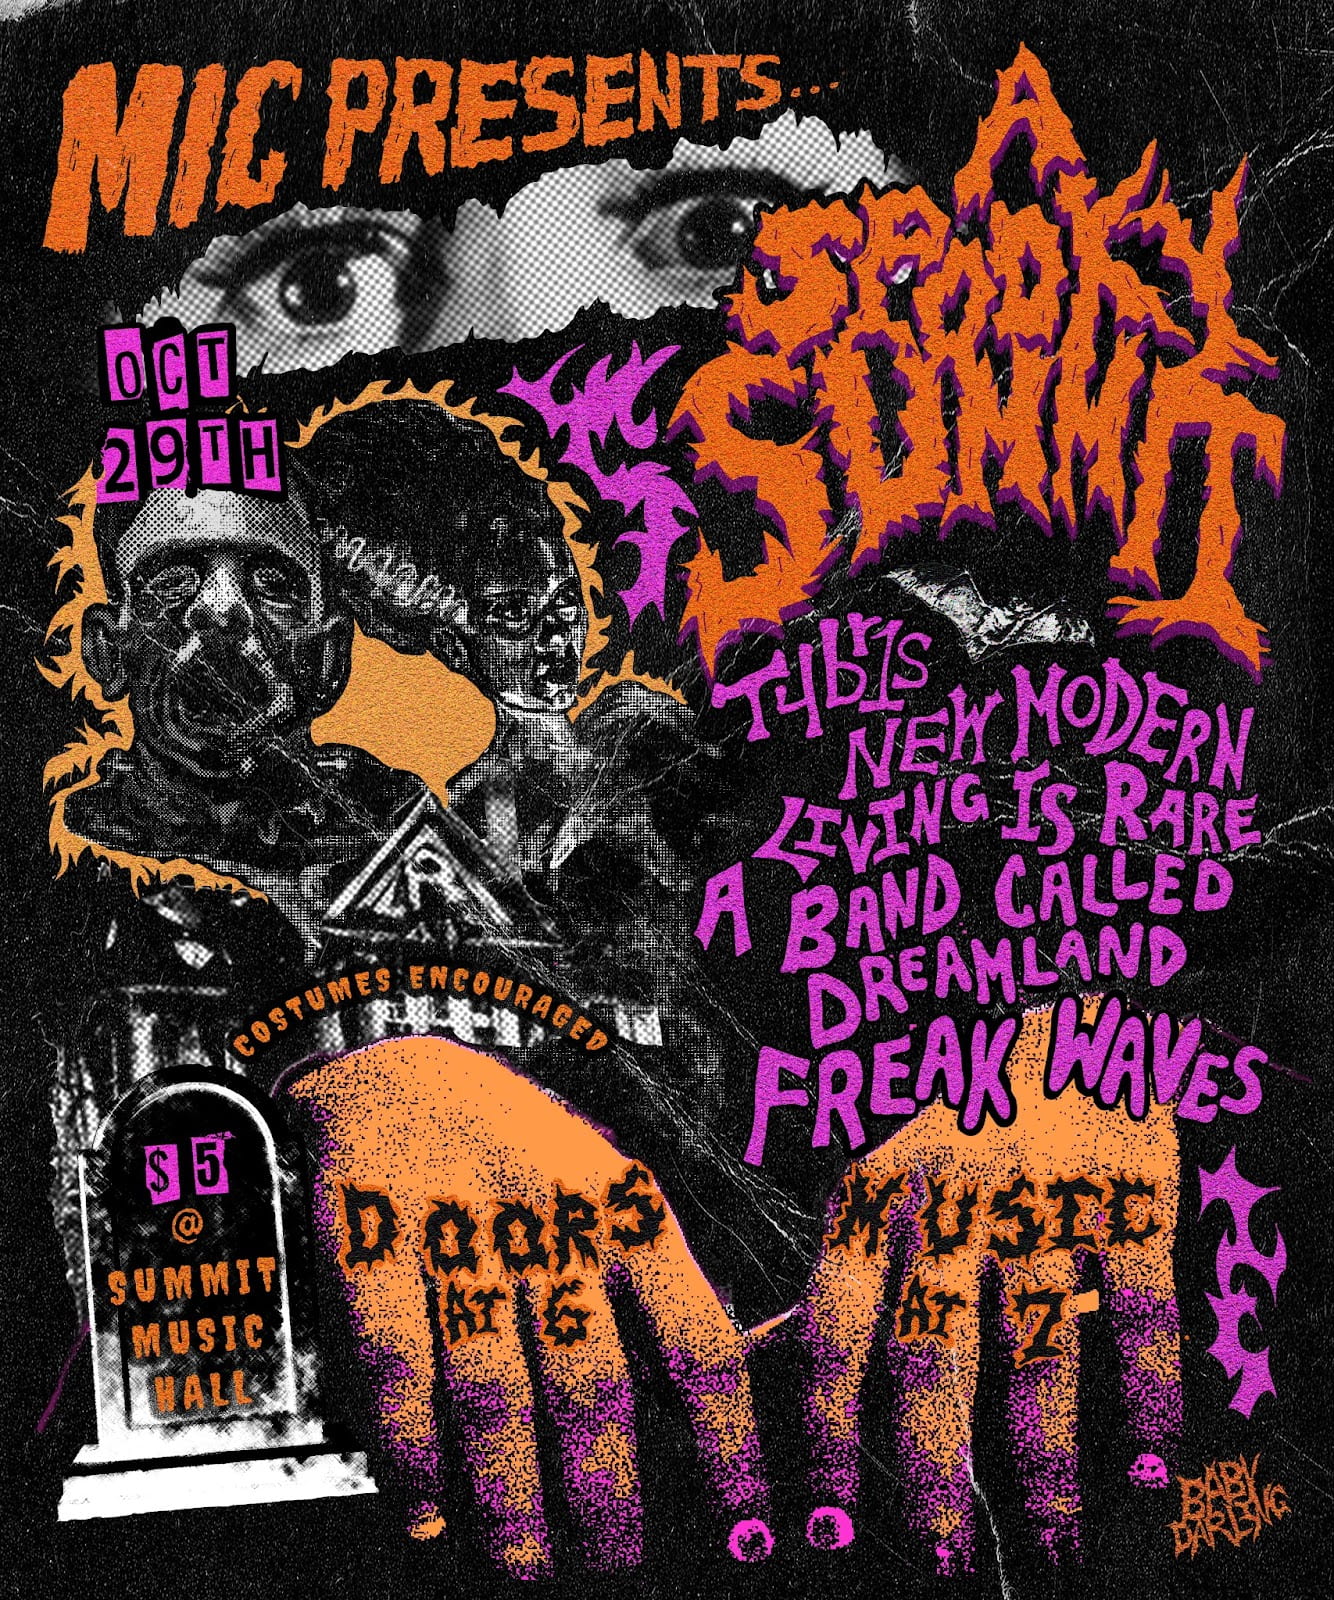 The promotional poster for "A Spooky Summit," a concert that will be hosted by Music Industry Club at Summit Music Hall Sunday. Credit: Courtesy of Music Industry Club